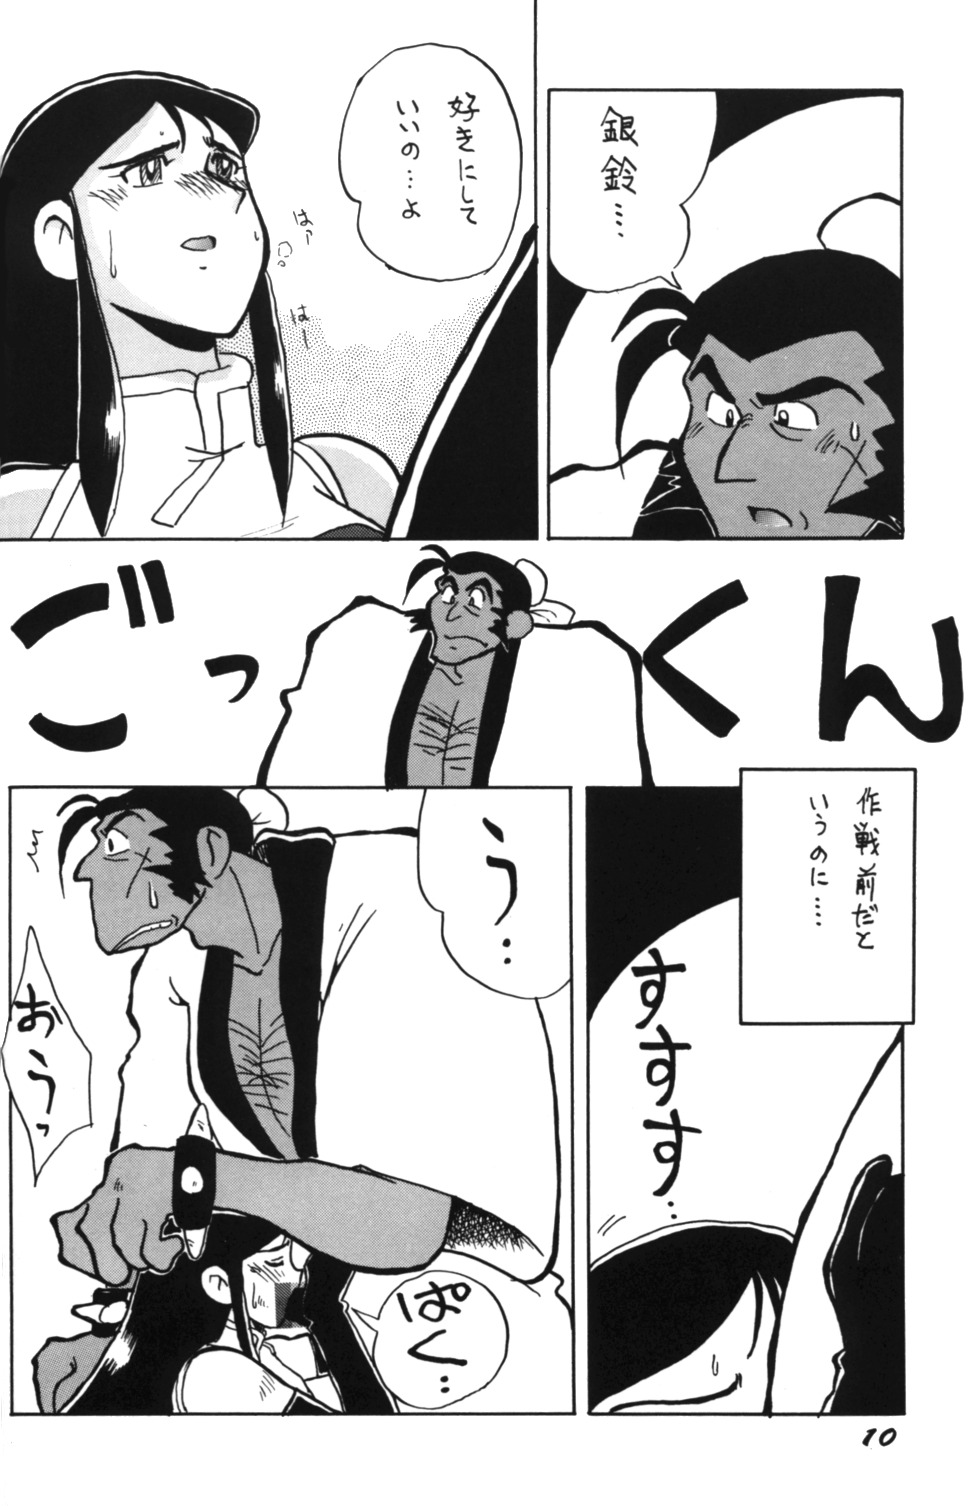 Ginrei Special GR-H (Giant Robo) page 10 full